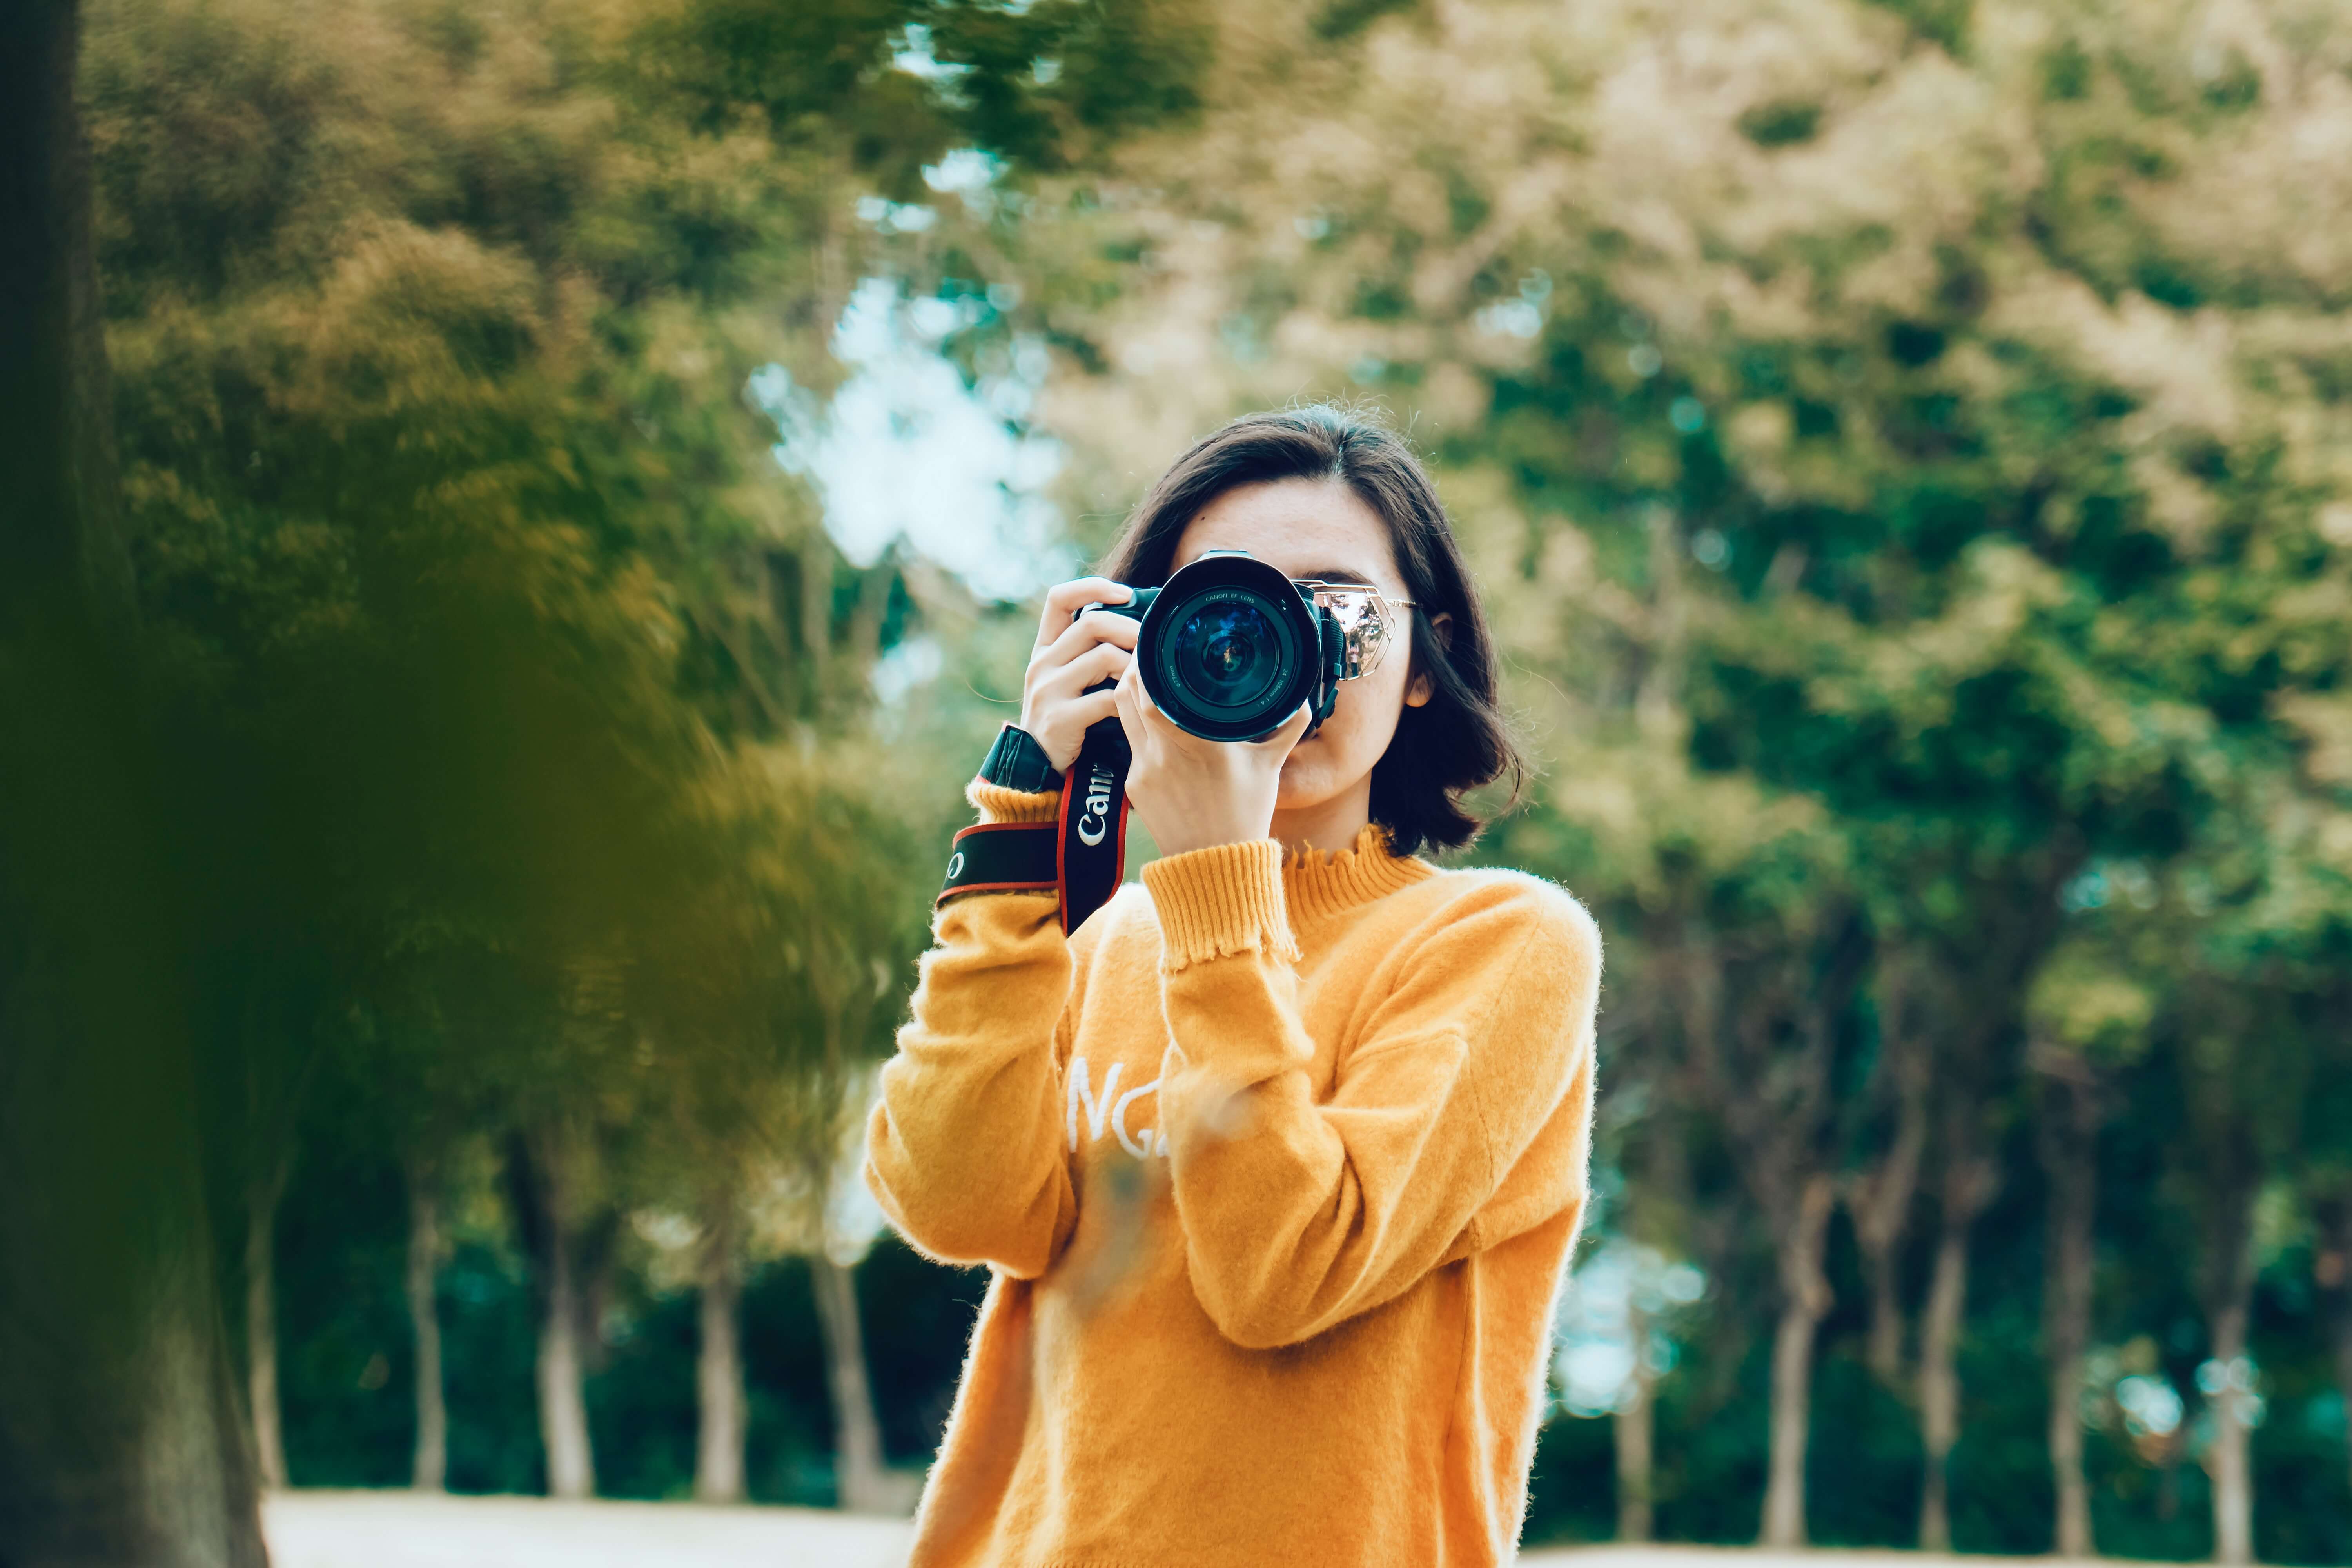 An east Asian woman taking a photo with a camera